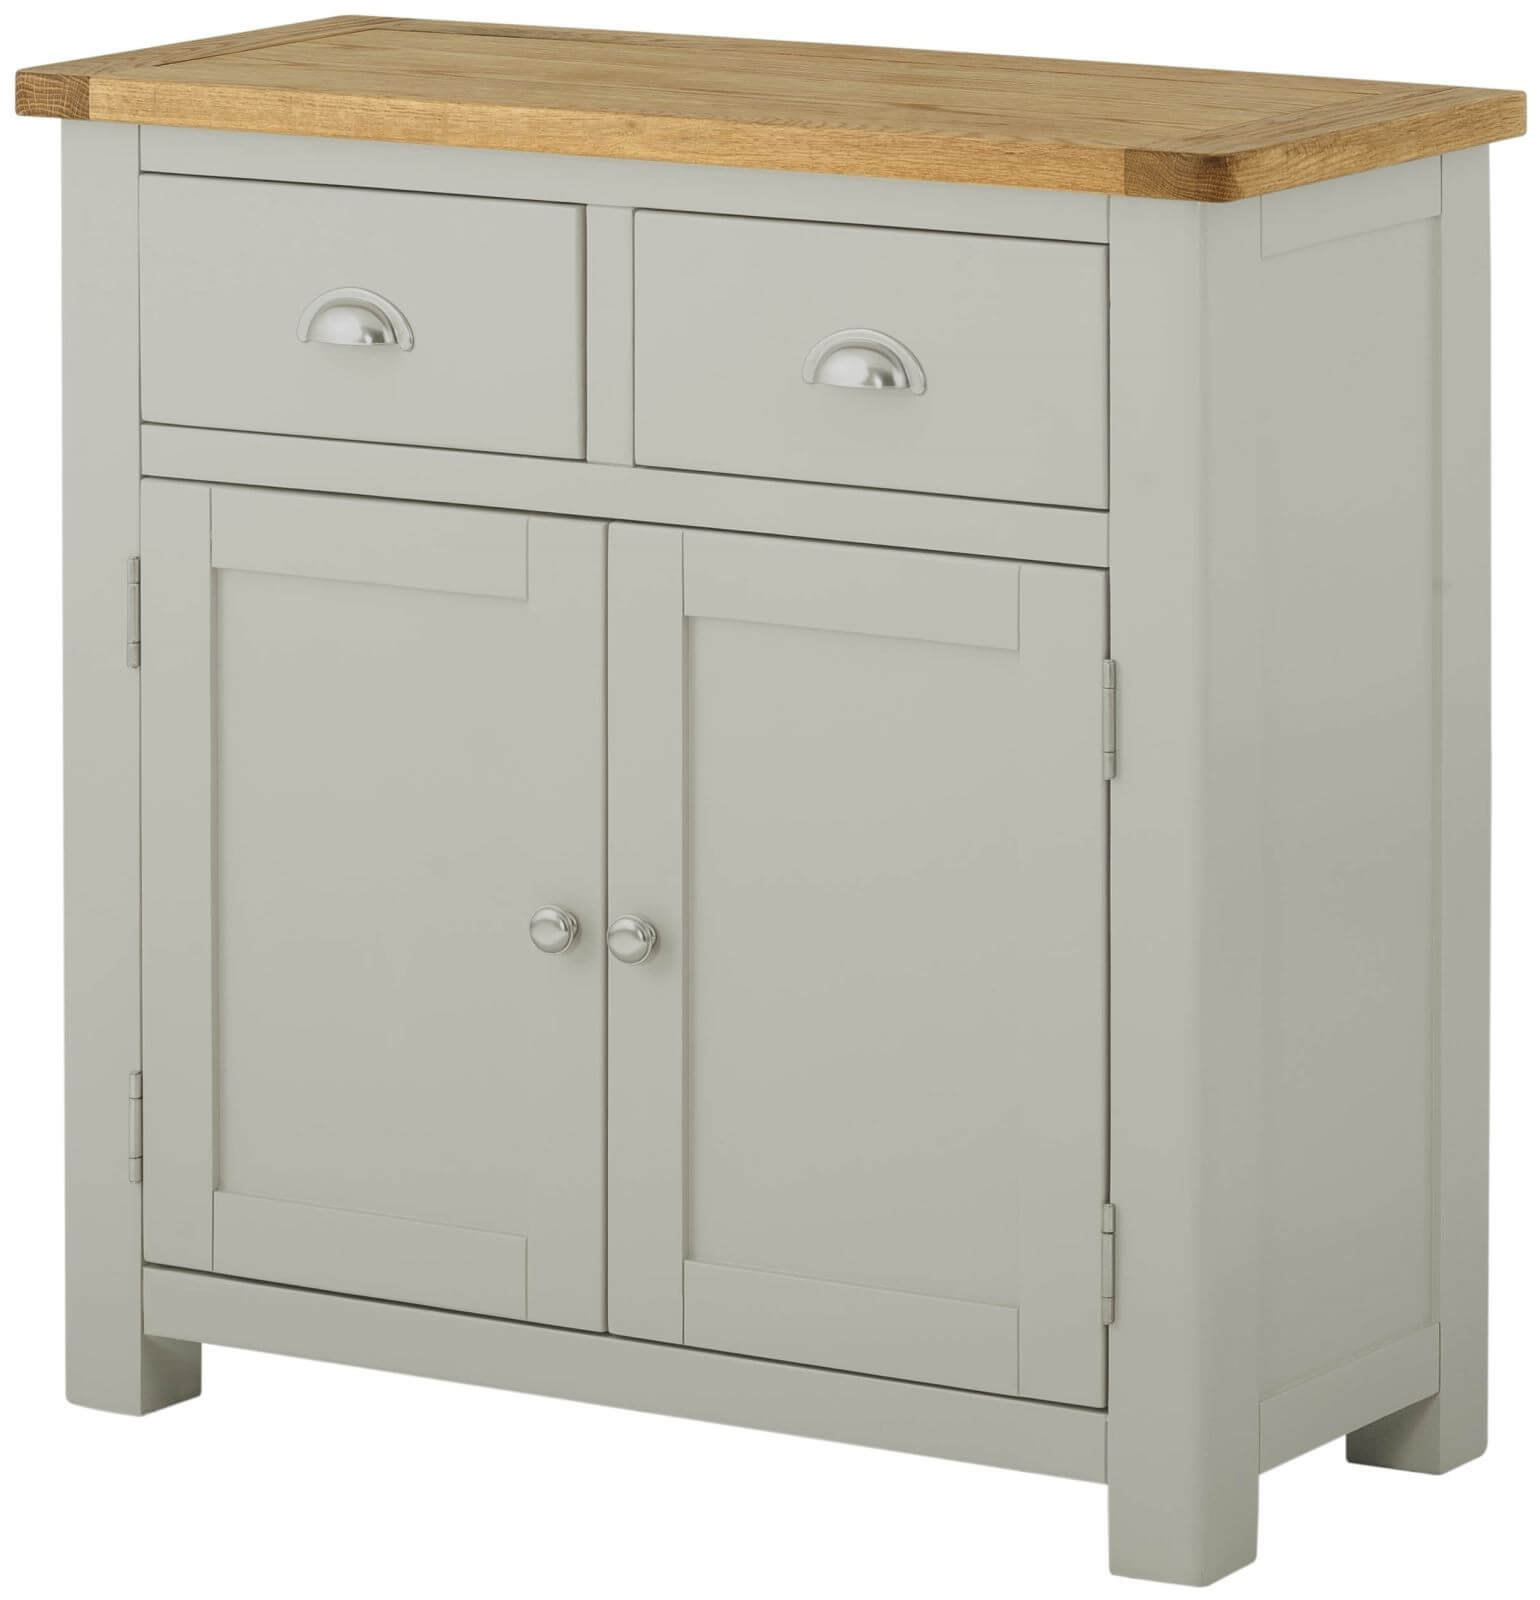 Showing image for Seattle 2-door sideboard - stone